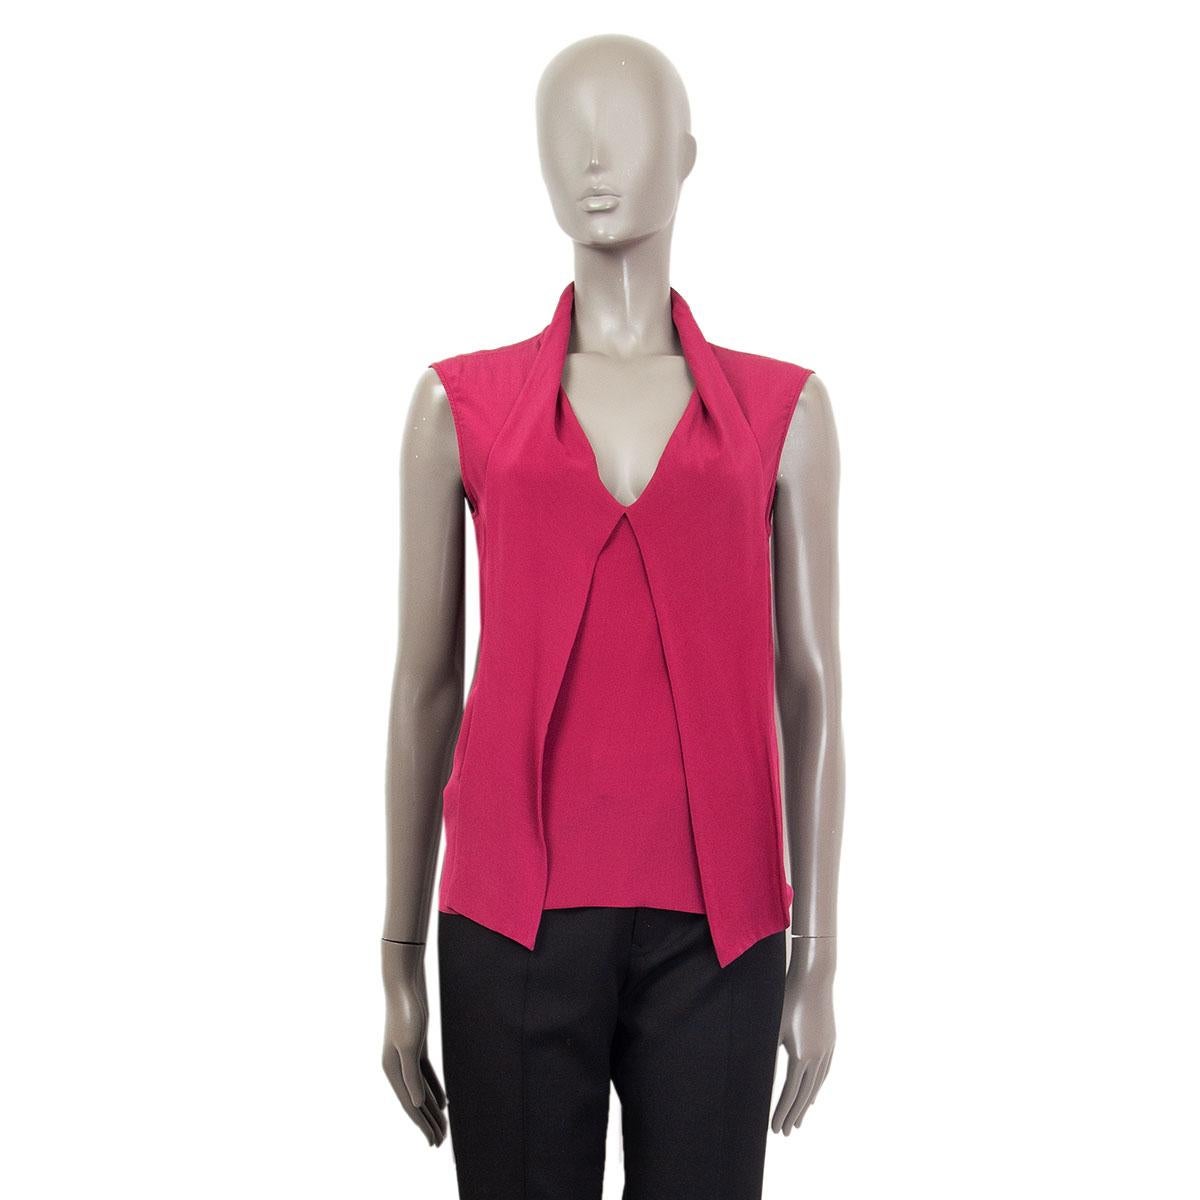 100% authentic Gucci v-neck sleeveless blouse in fuchsia silk (100%). Tie detail at front. Has been worn and is in excellent condition.

Measurements
Tag Size	40
Size	S
Shoulder Width	42cm (16.4in)
Bust To	86cm (33.5in)
Waist To	82cm (32in)
Hips